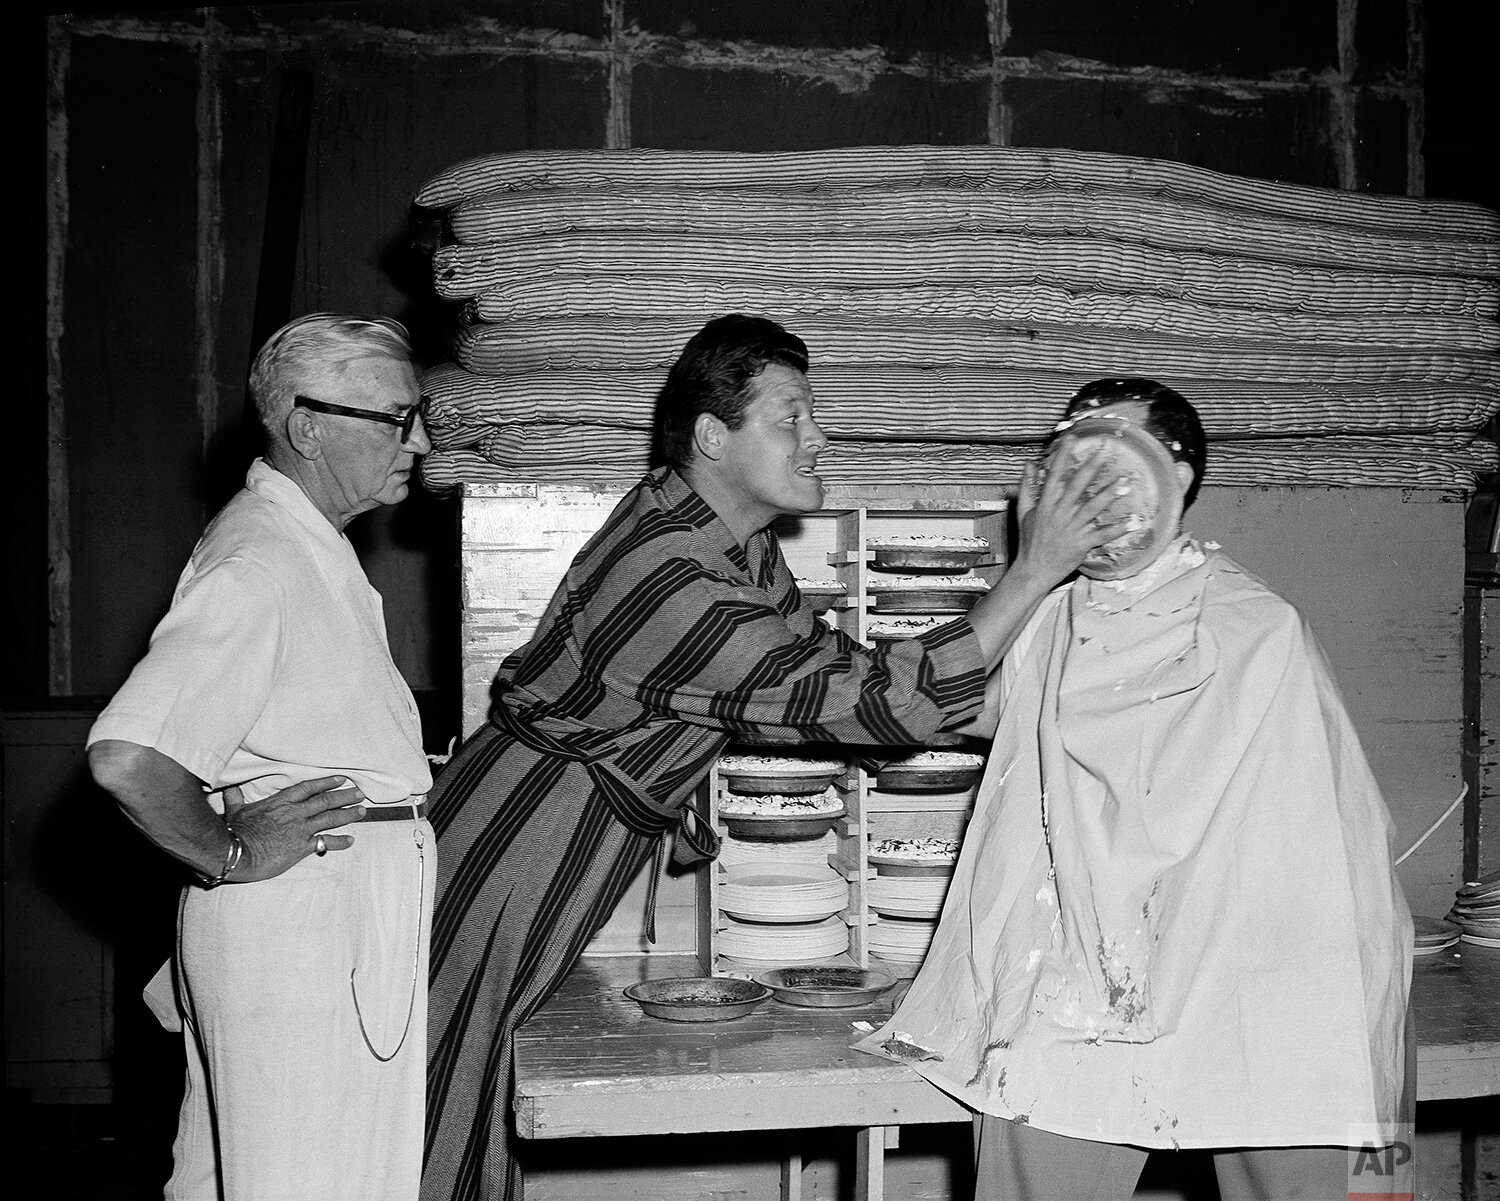  With a dexterous sweep of his right hand, actor Jack Carson shoves the pie smack into the face of AP reporter Bob Thomas, who volunteered for the receiving end to see how the movie pie-tossing technique works in Los Angeles on July 5, 1949. At left,